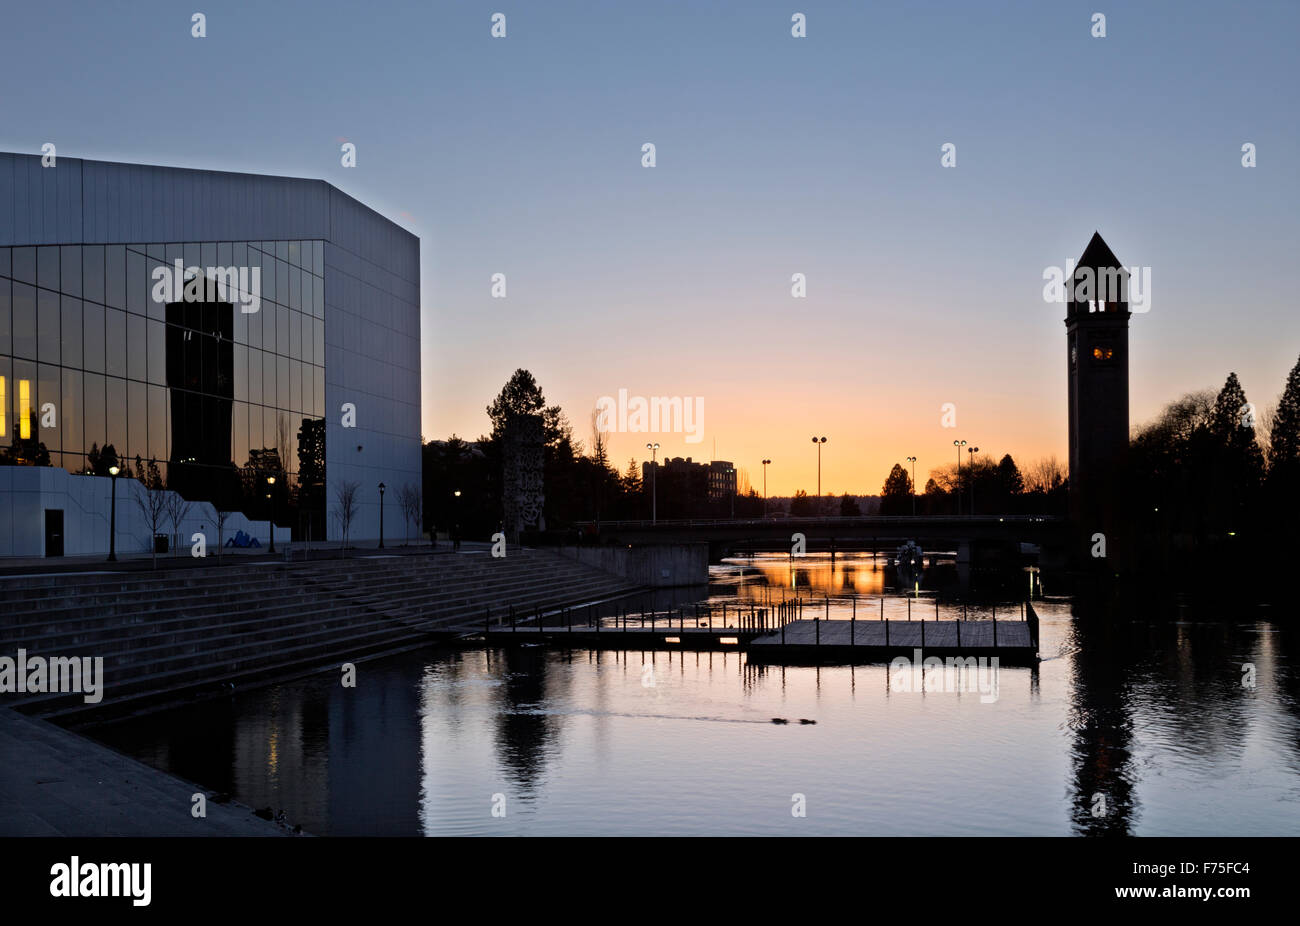 The Spokane Clock Tower reflecting at sunset in the glass windows of the Convention Center located in Riverside Park, Spokane. Stock Photo